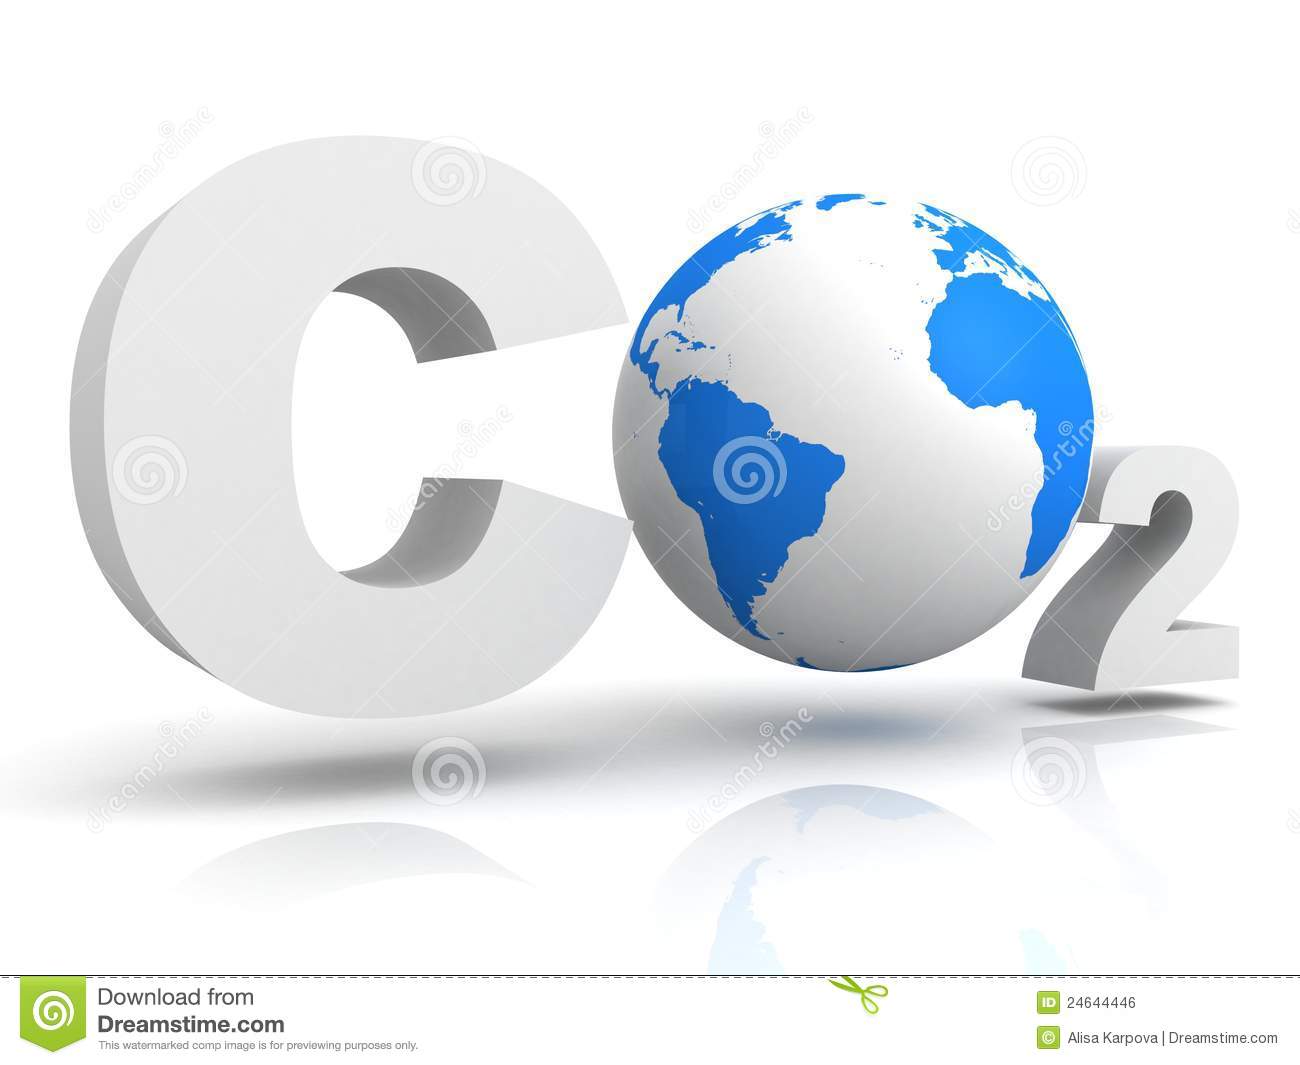 Chemical Symbol Co2 For Carbon Dioxide With Globe Royalty Free Stock